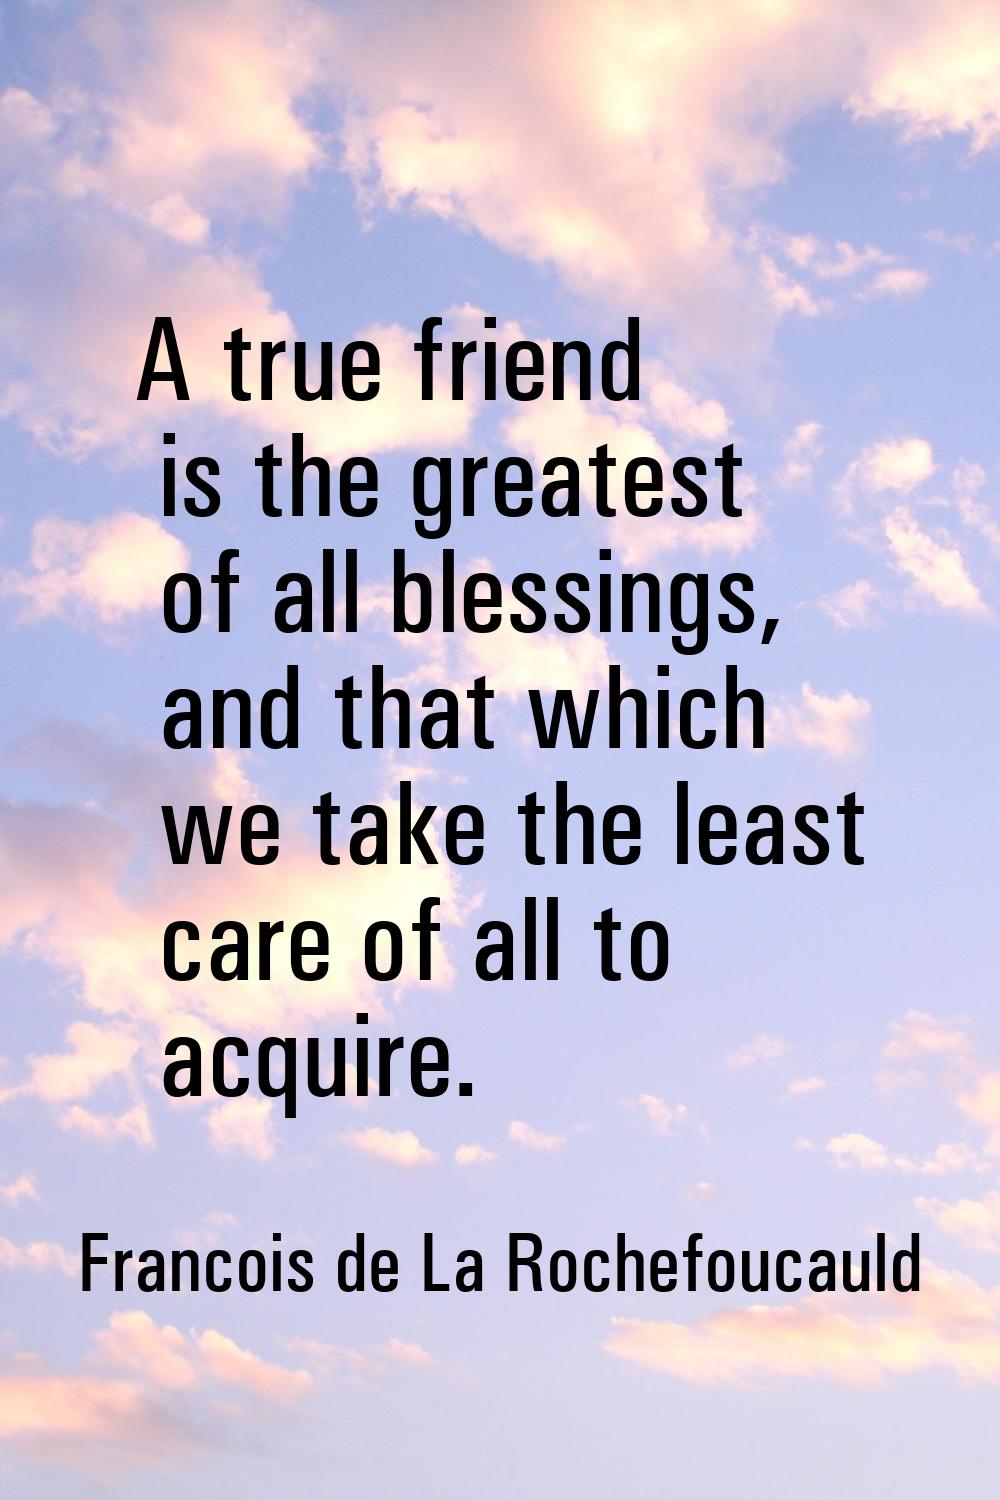 A true friend is the greatest of all blessings, and that which we take the least care of all to acq